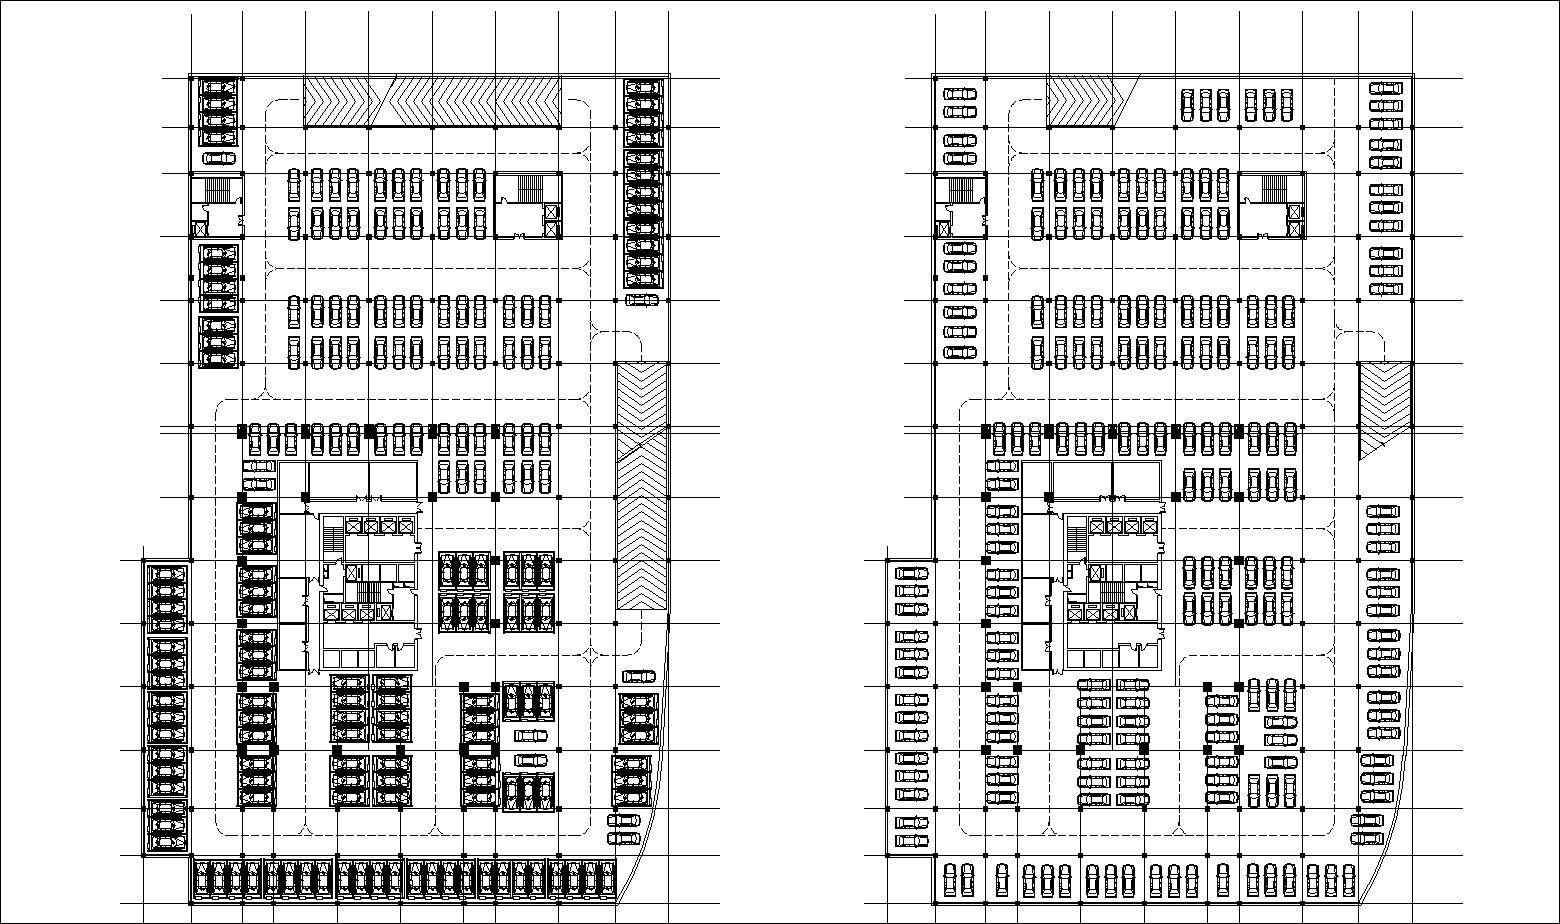  Hotel  Floor Plans and Drawings-Elevations, Floor Plans, and Details